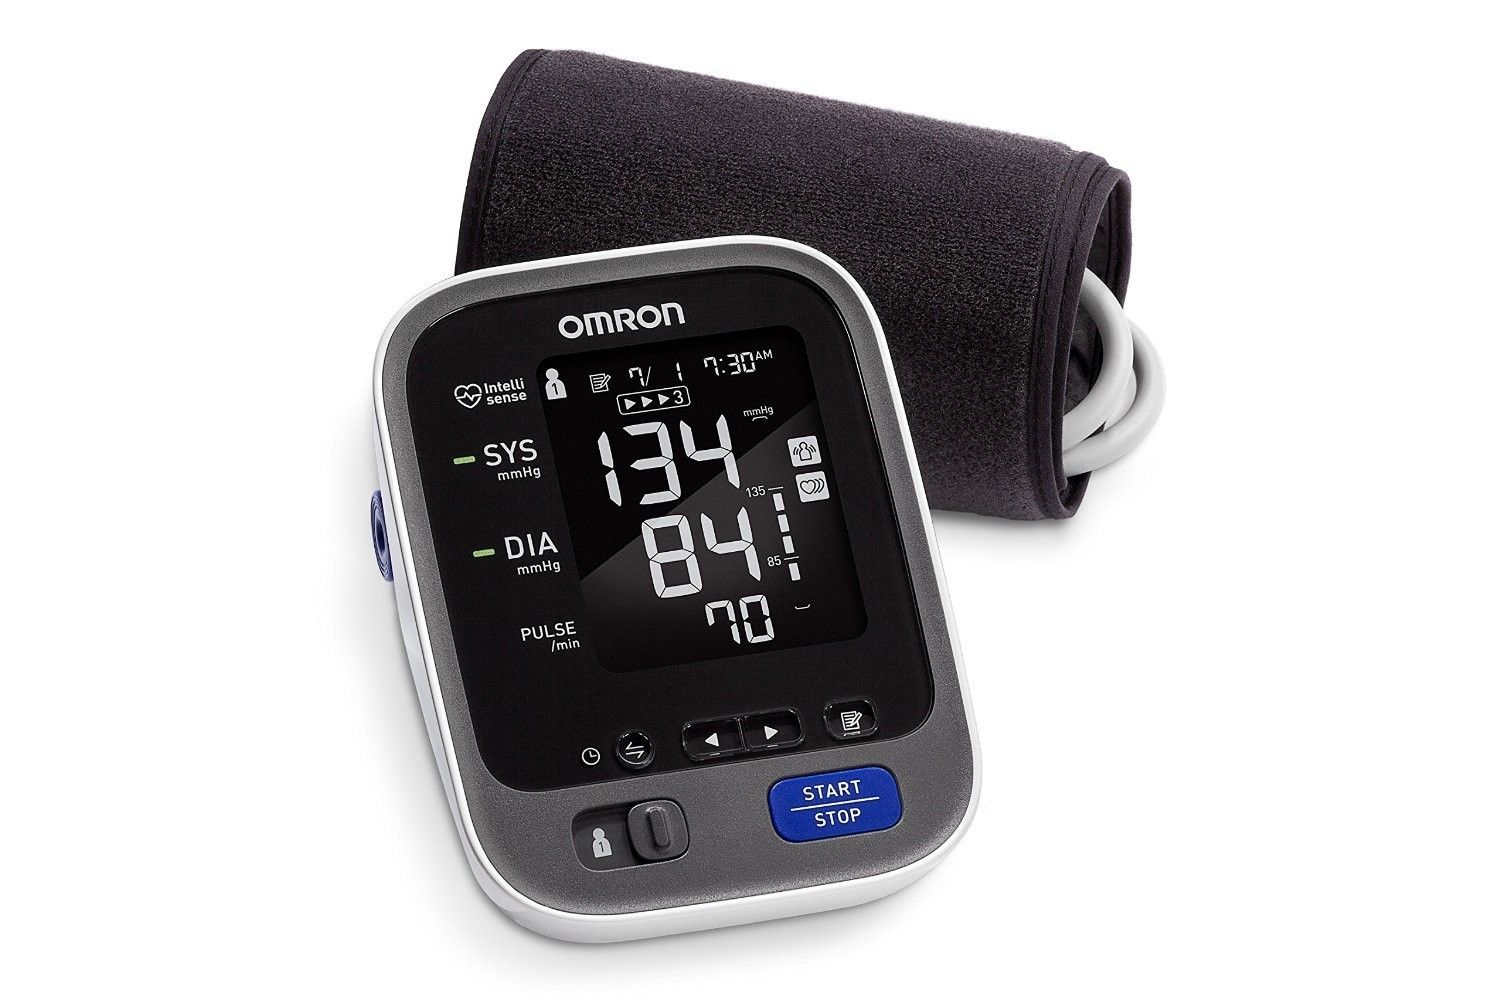 Omron BP786N Blood Pressure Monitor. Comes with monitor, cuff, 120 Volt power supply, 4 AA batteries, clear zippered bag.